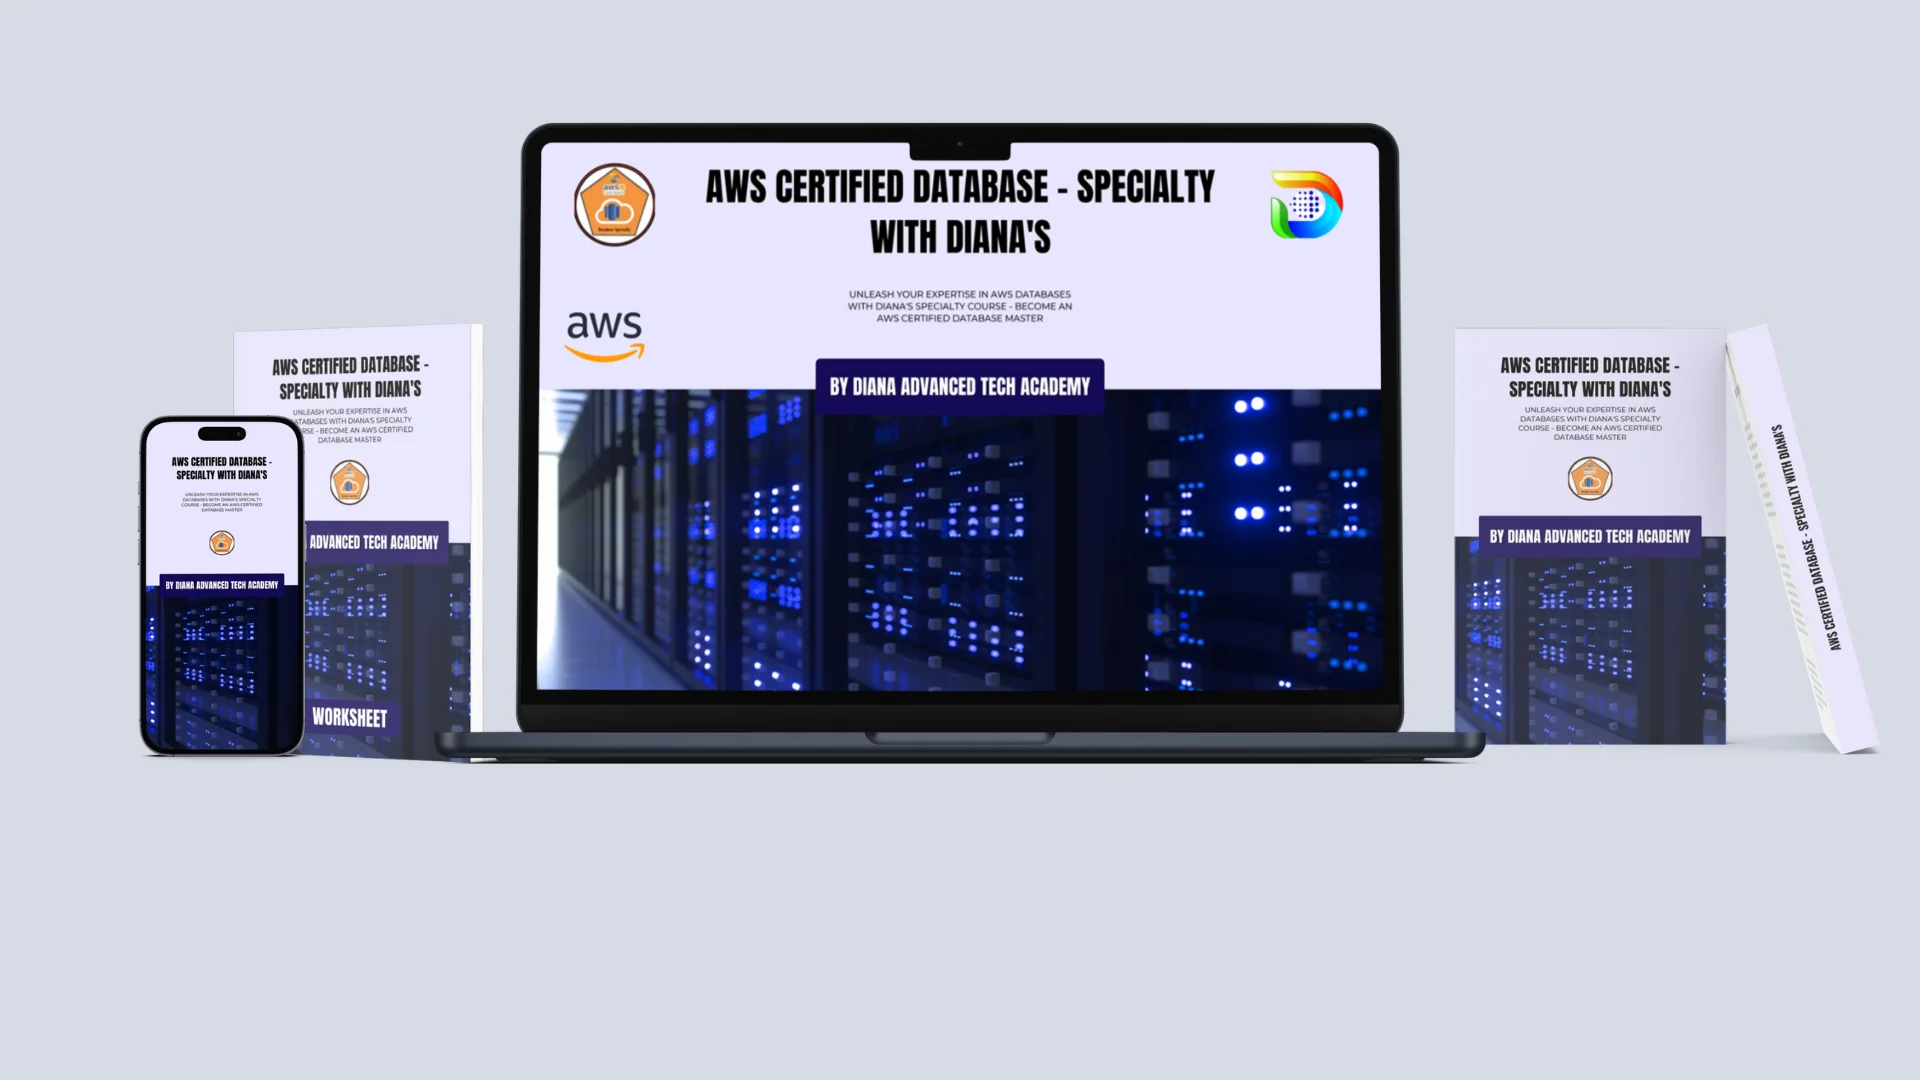 AWS Certified Database – Specialty with Diana’s